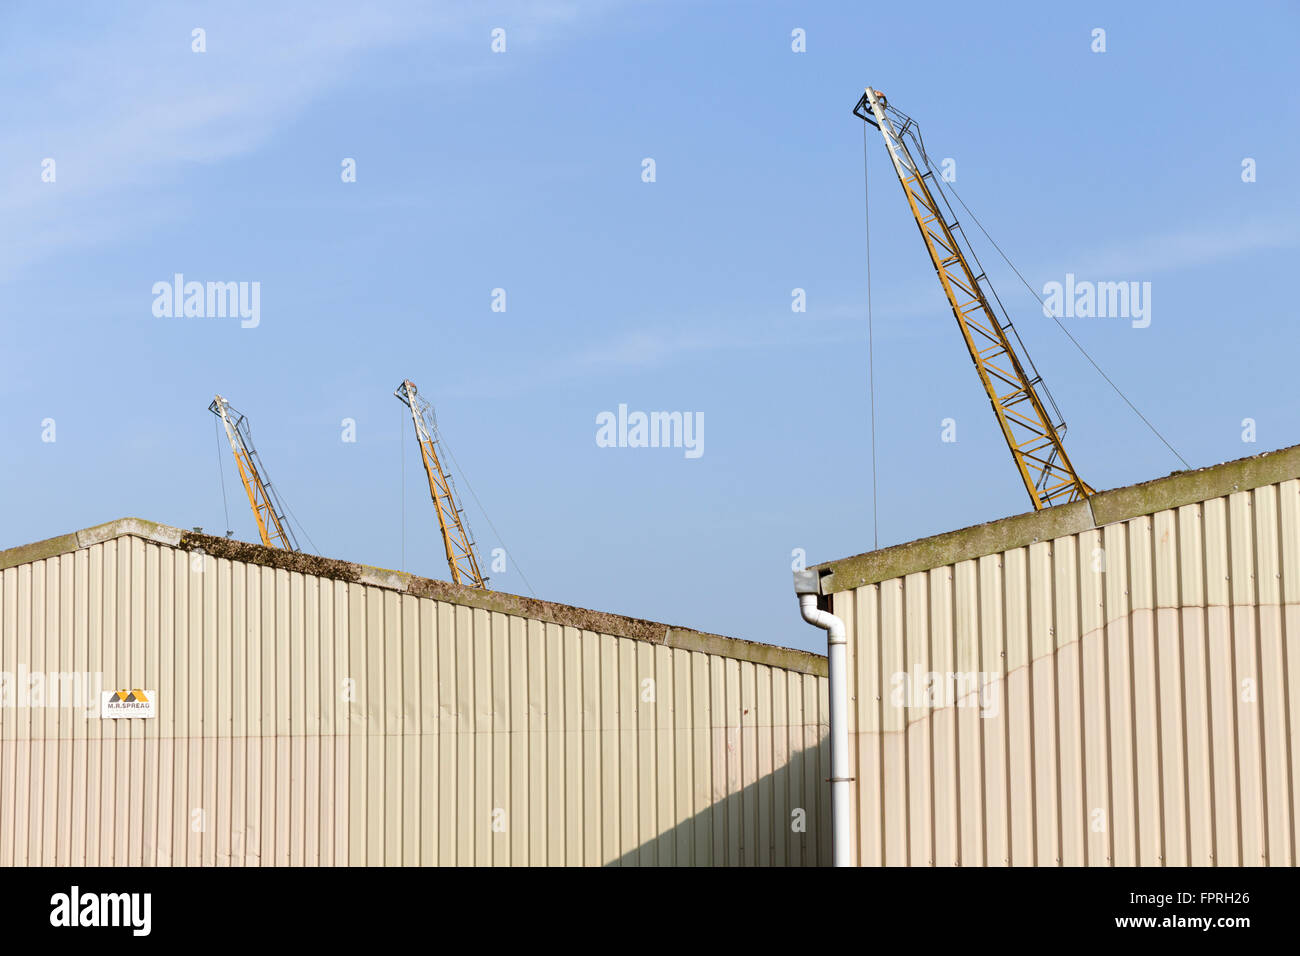 Warehouses and cranes at Sharpness Docks, South Gloucestershire, UK. Stock Photo